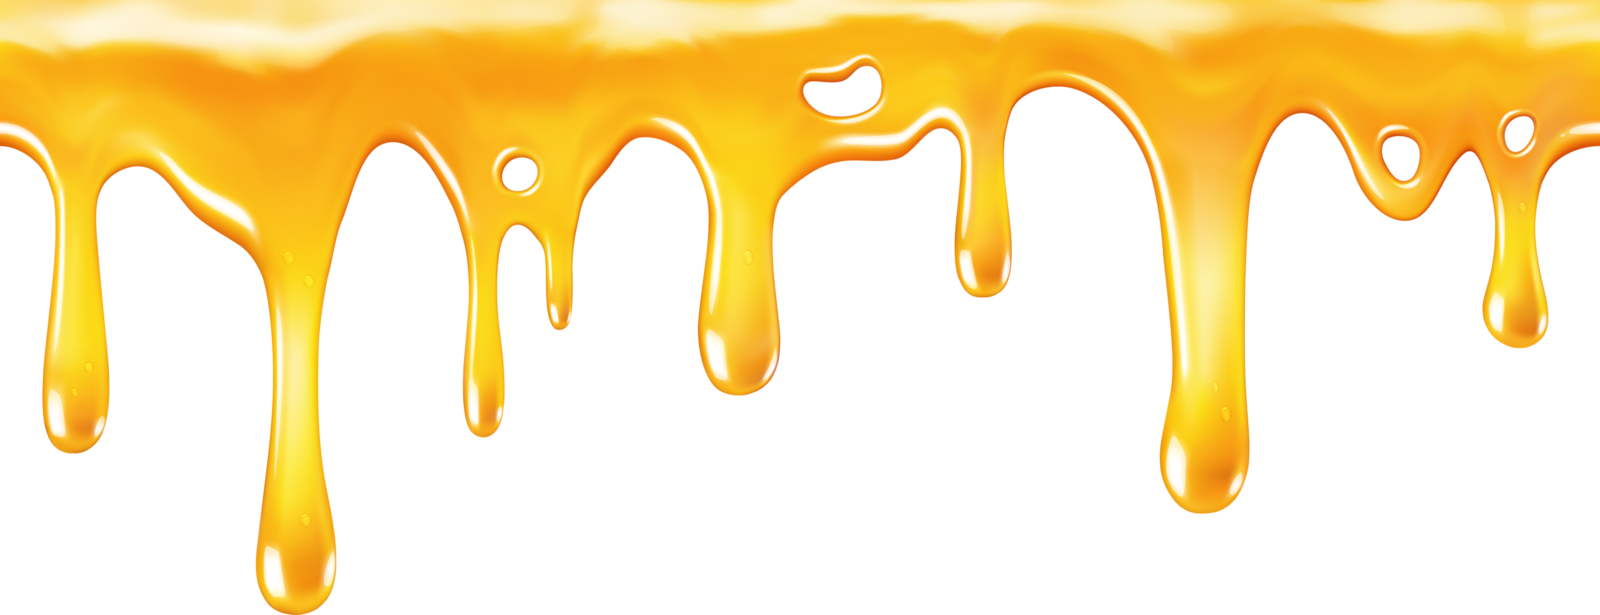 Honey PNG High-Quality Image